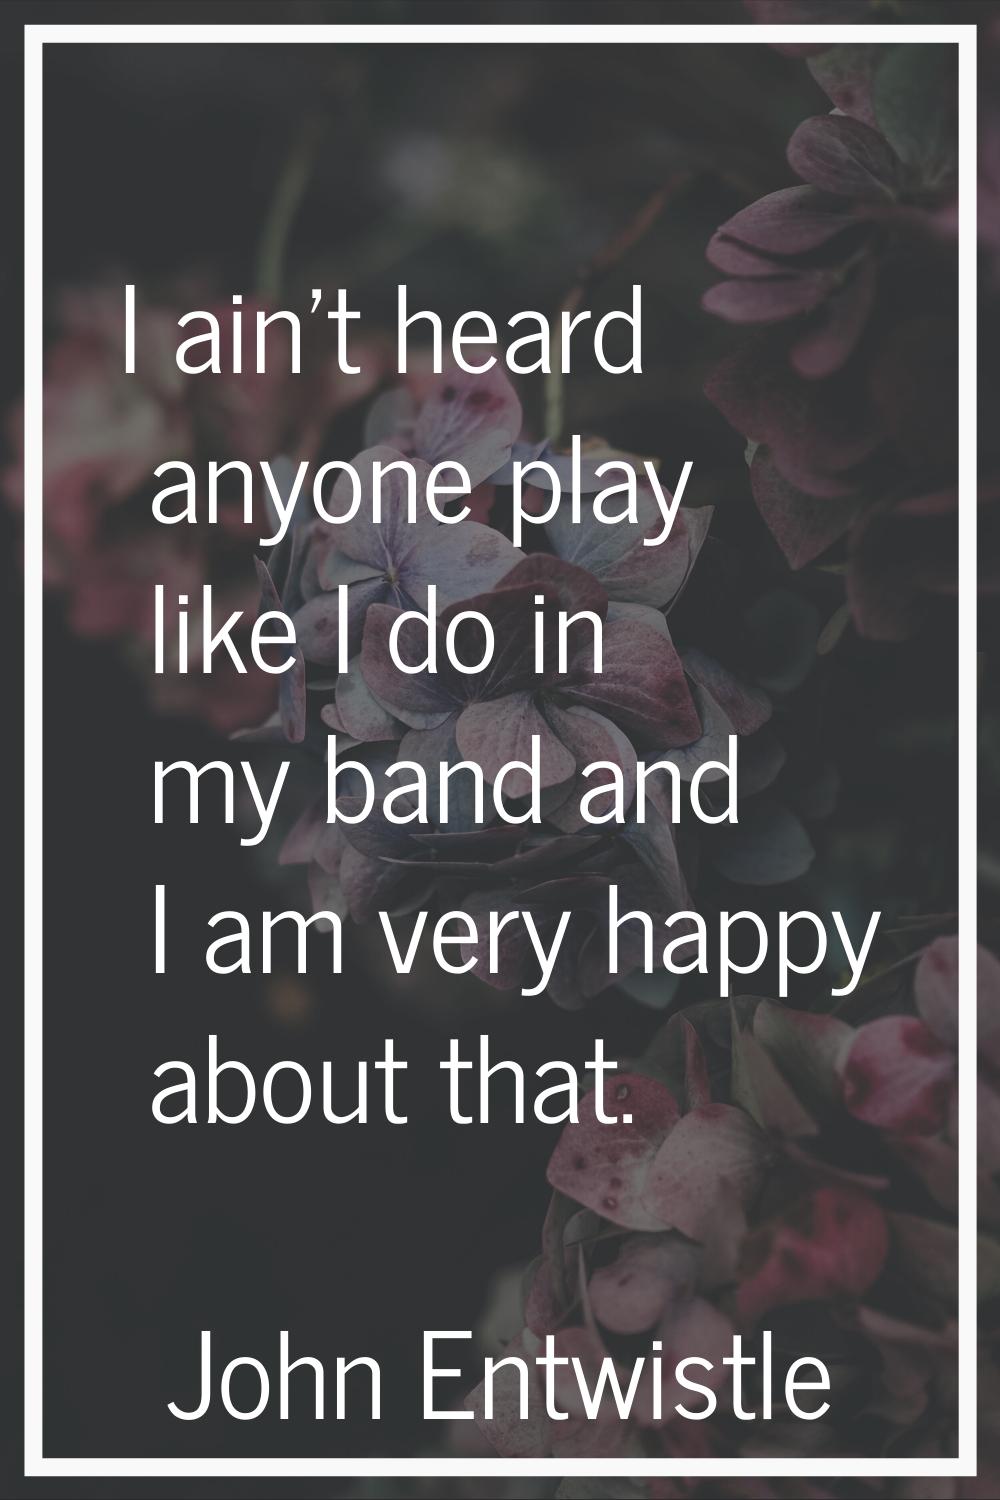 I ain't heard anyone play like I do in my band and I am very happy about that.